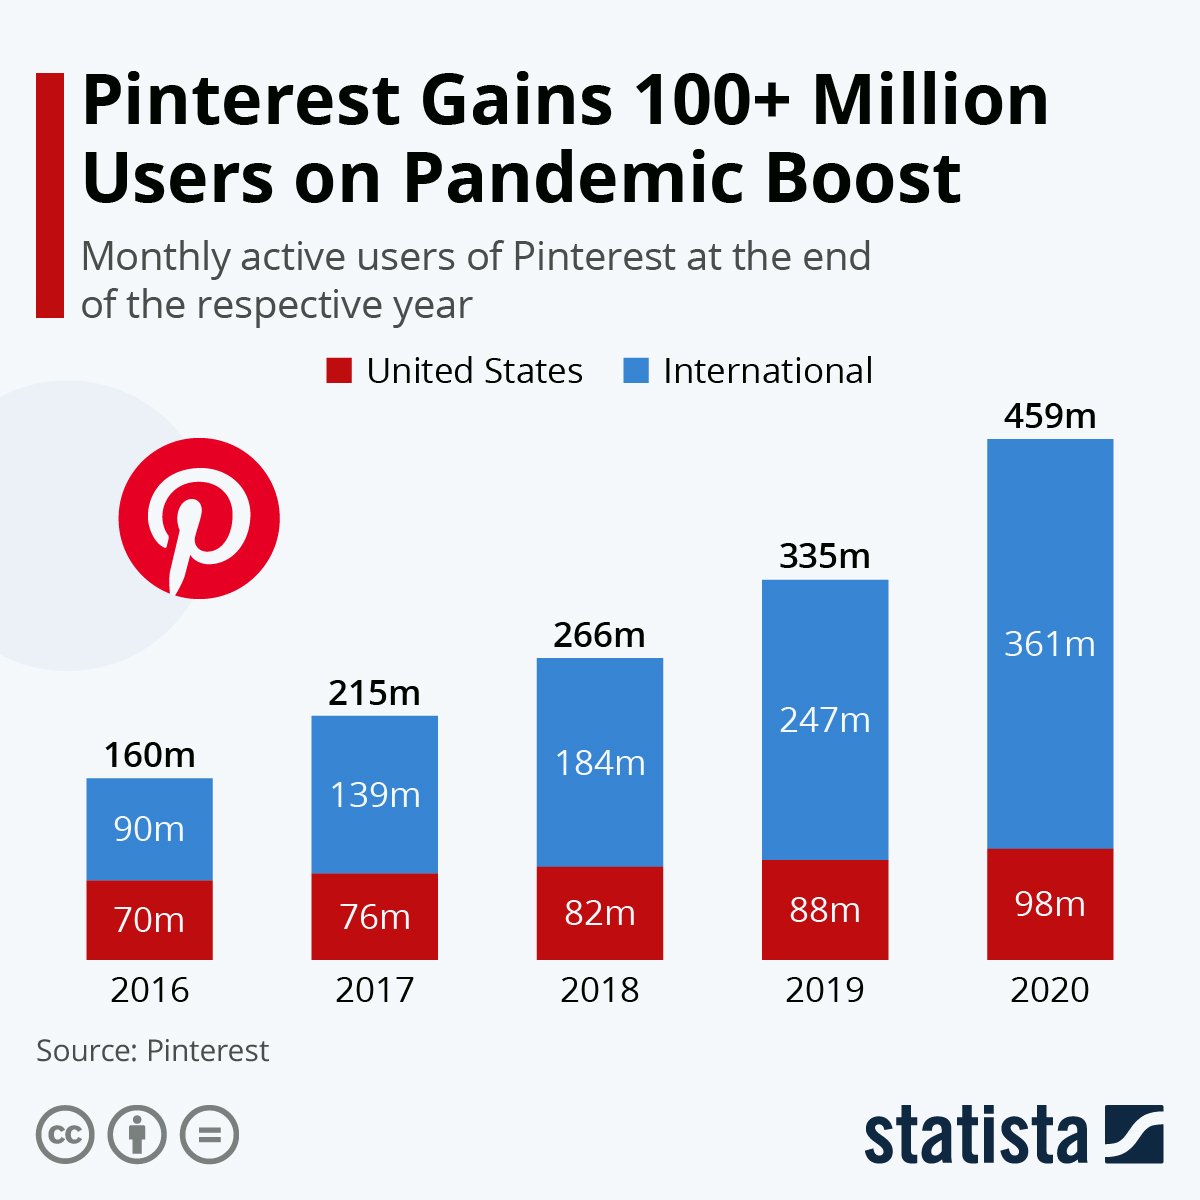 Pinterest gains 100+ million users thanks to the pandemic